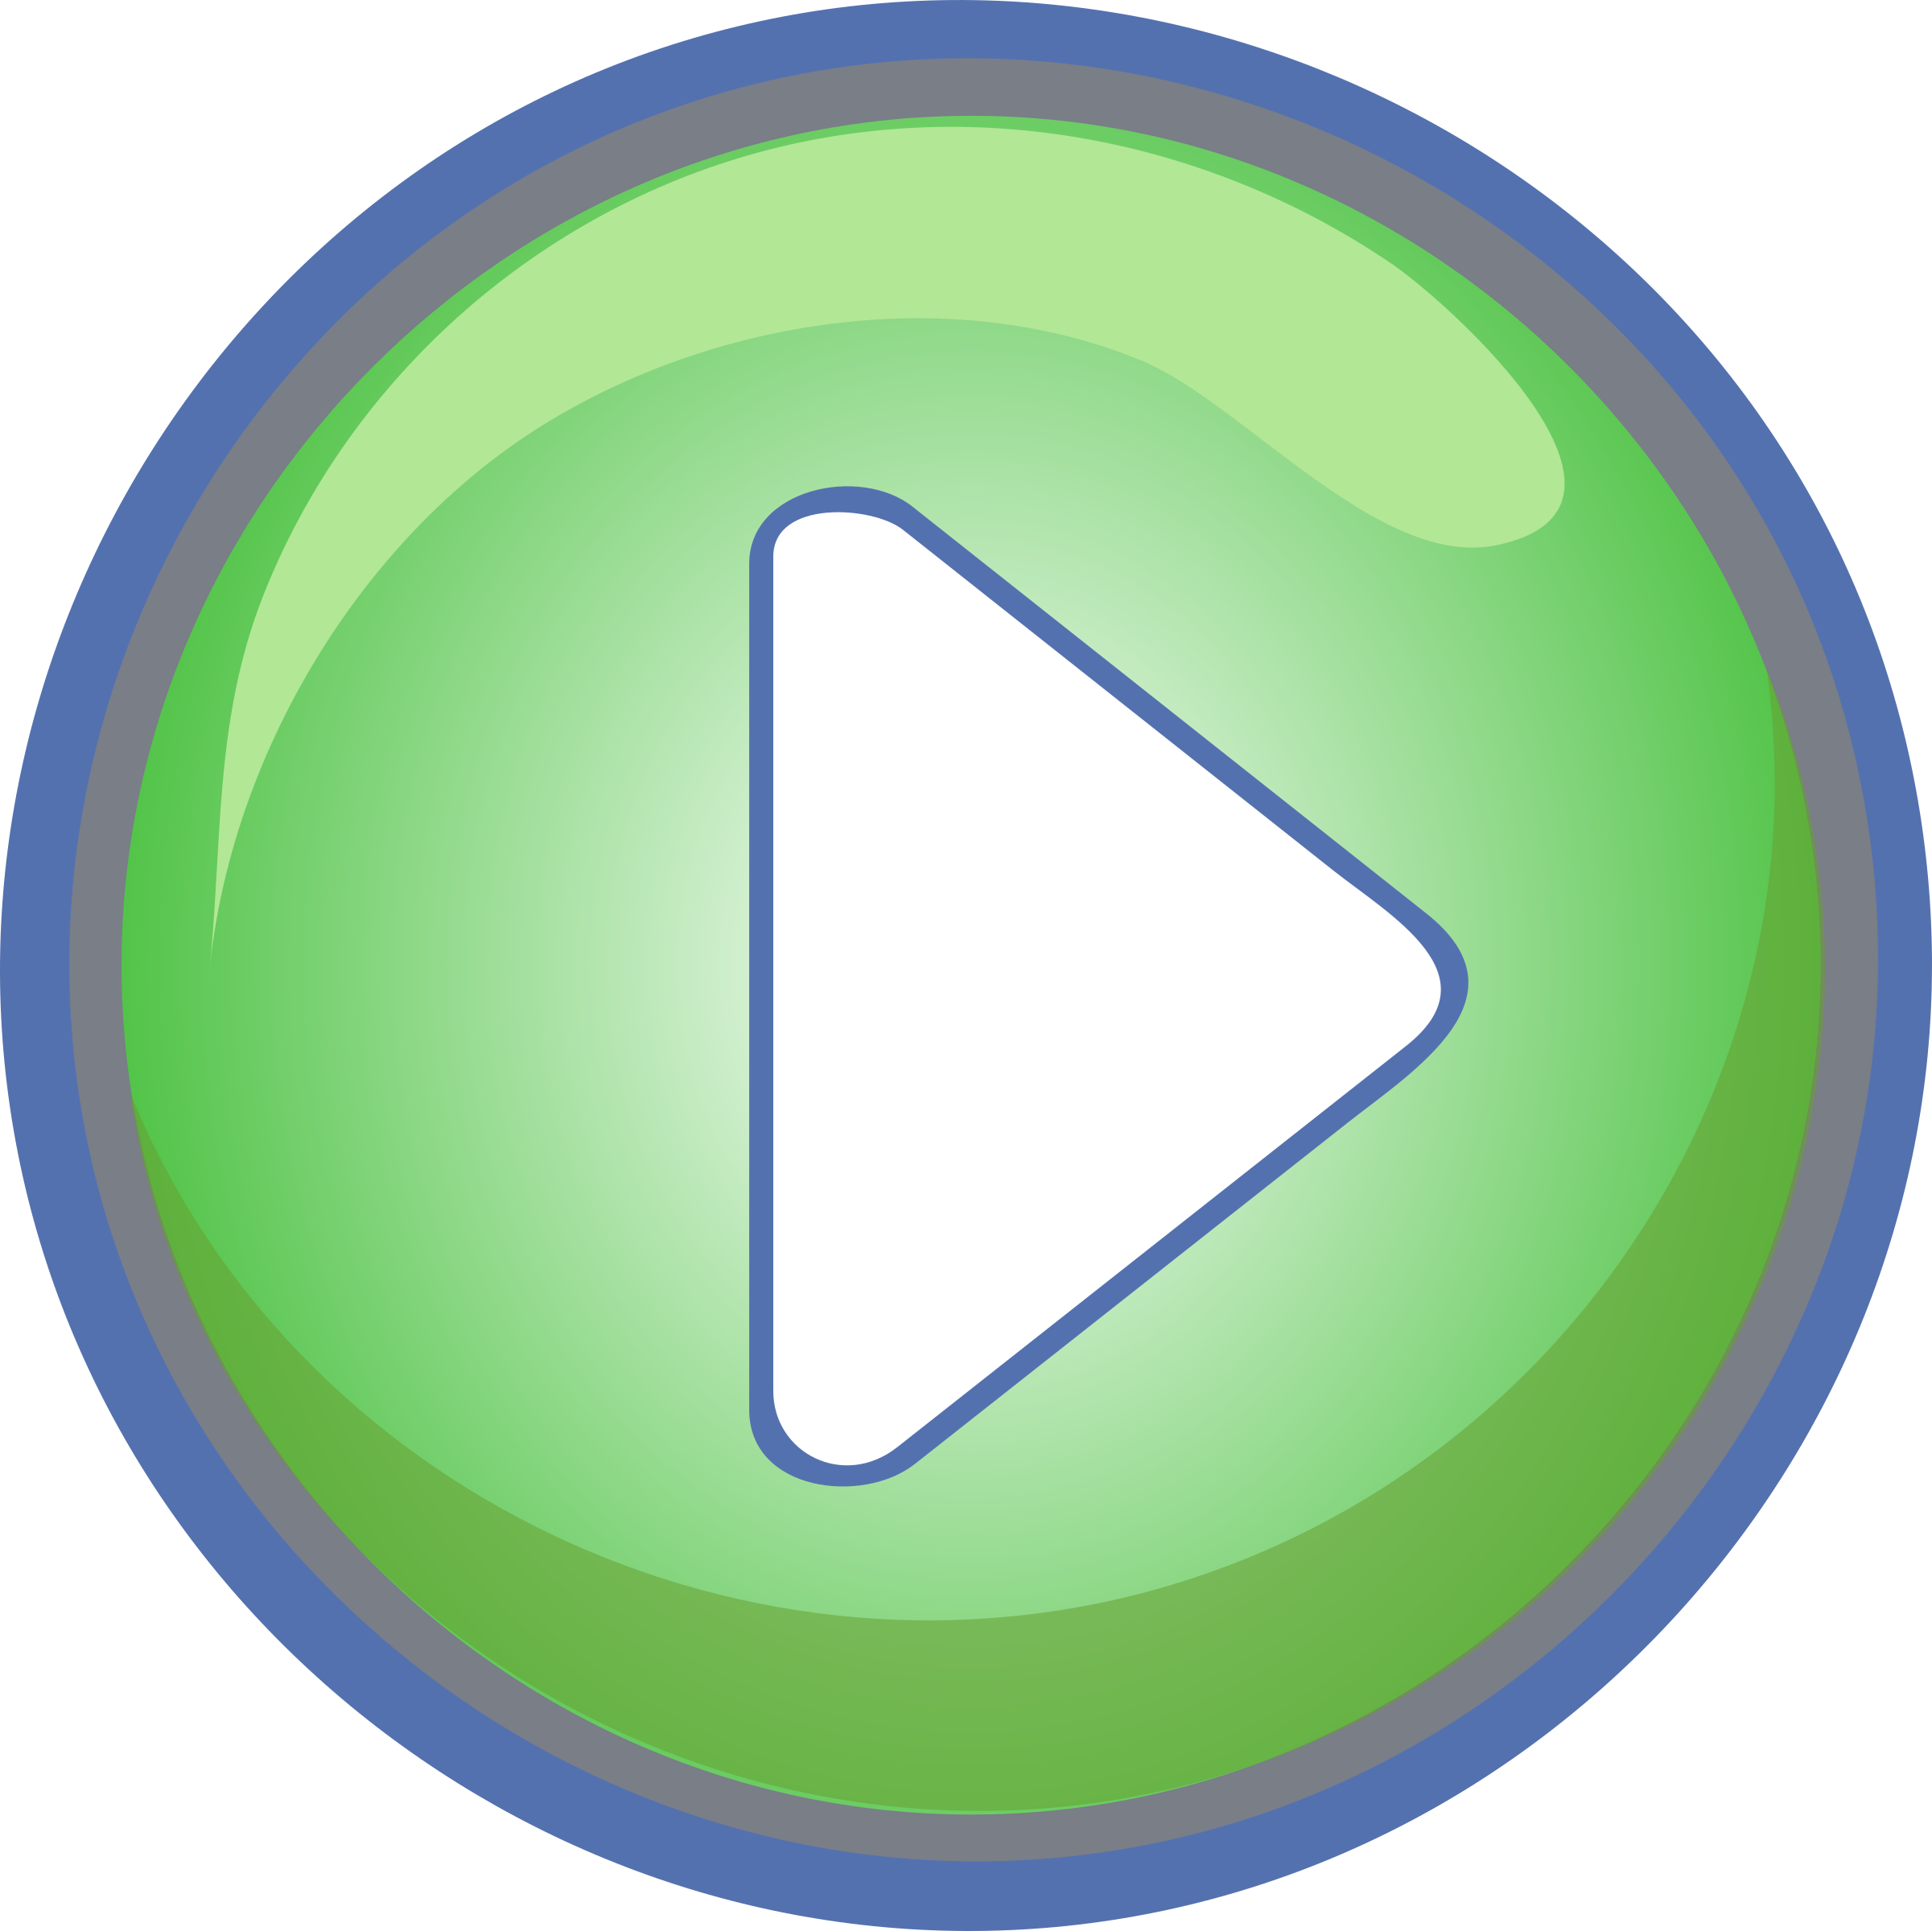 Clipart - Play Button Green with Blue Border